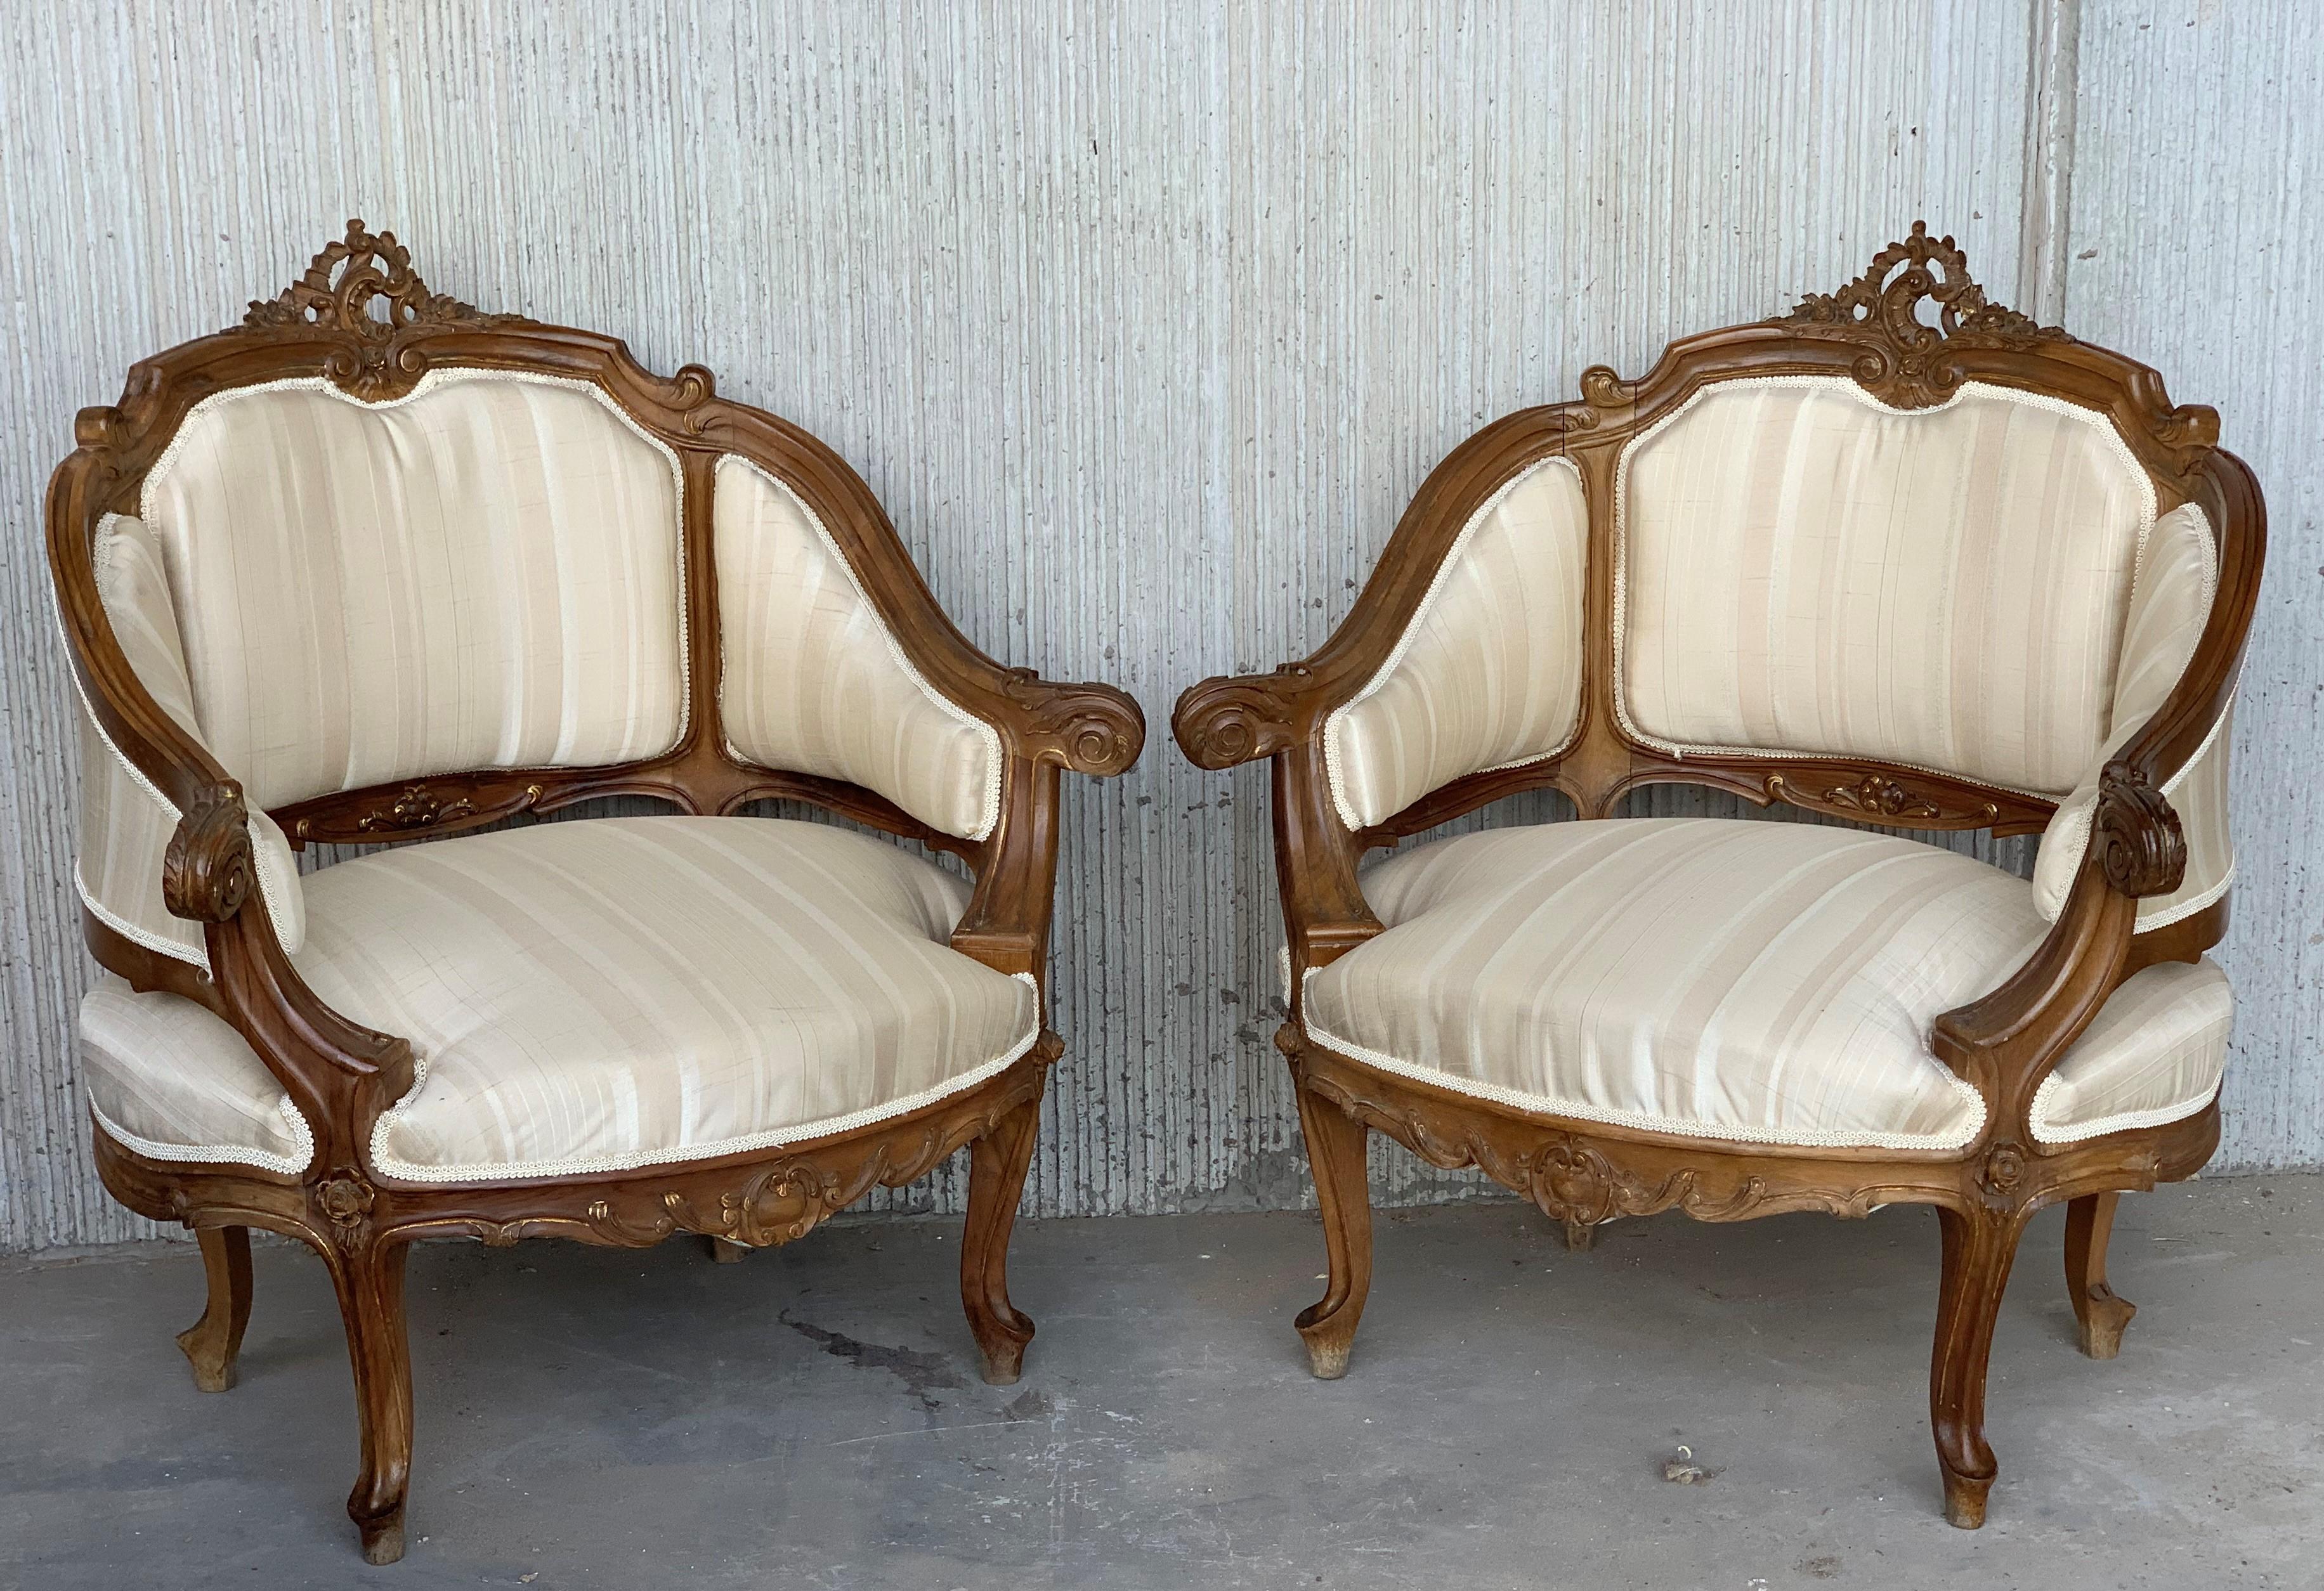 Pair of Italian Rococó Fauteuils or slipper chairs.